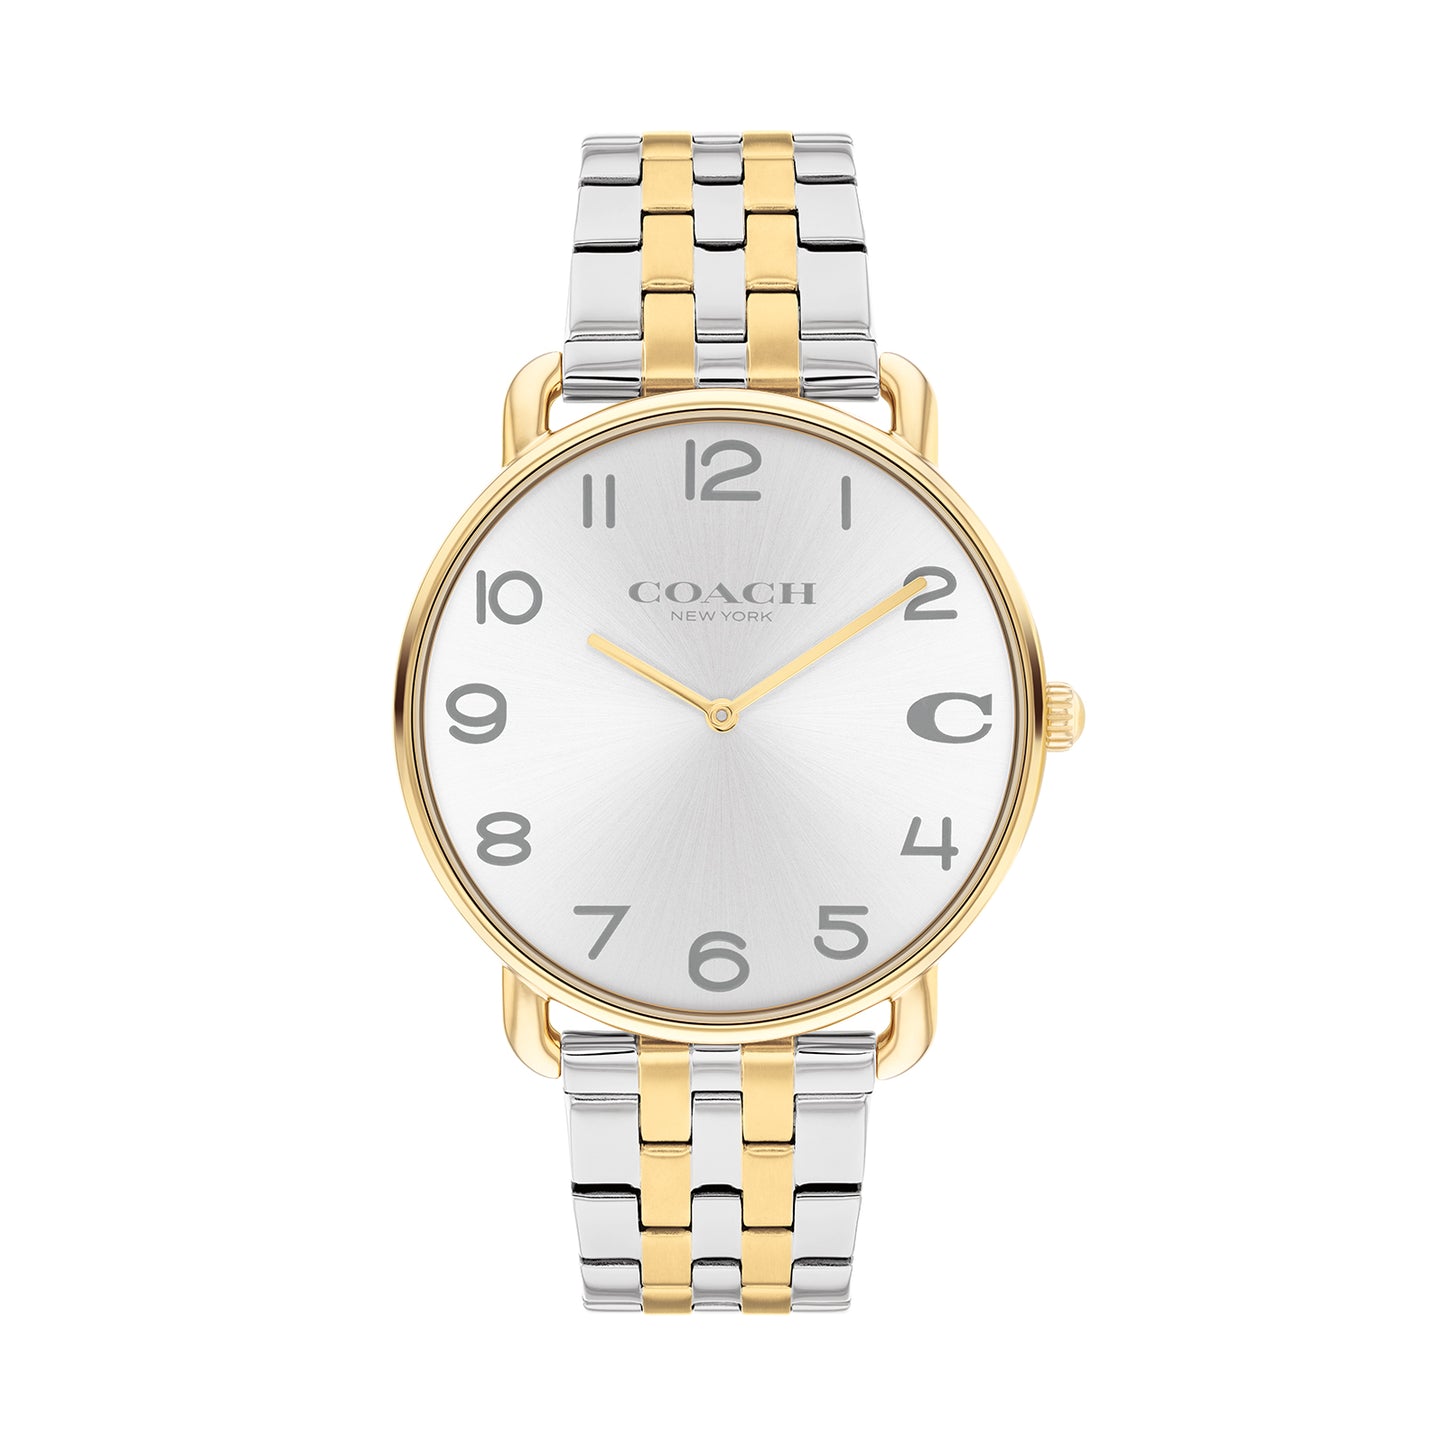 Coach 14602668 Men's Ionic Thin Gold Plated Steel Watch